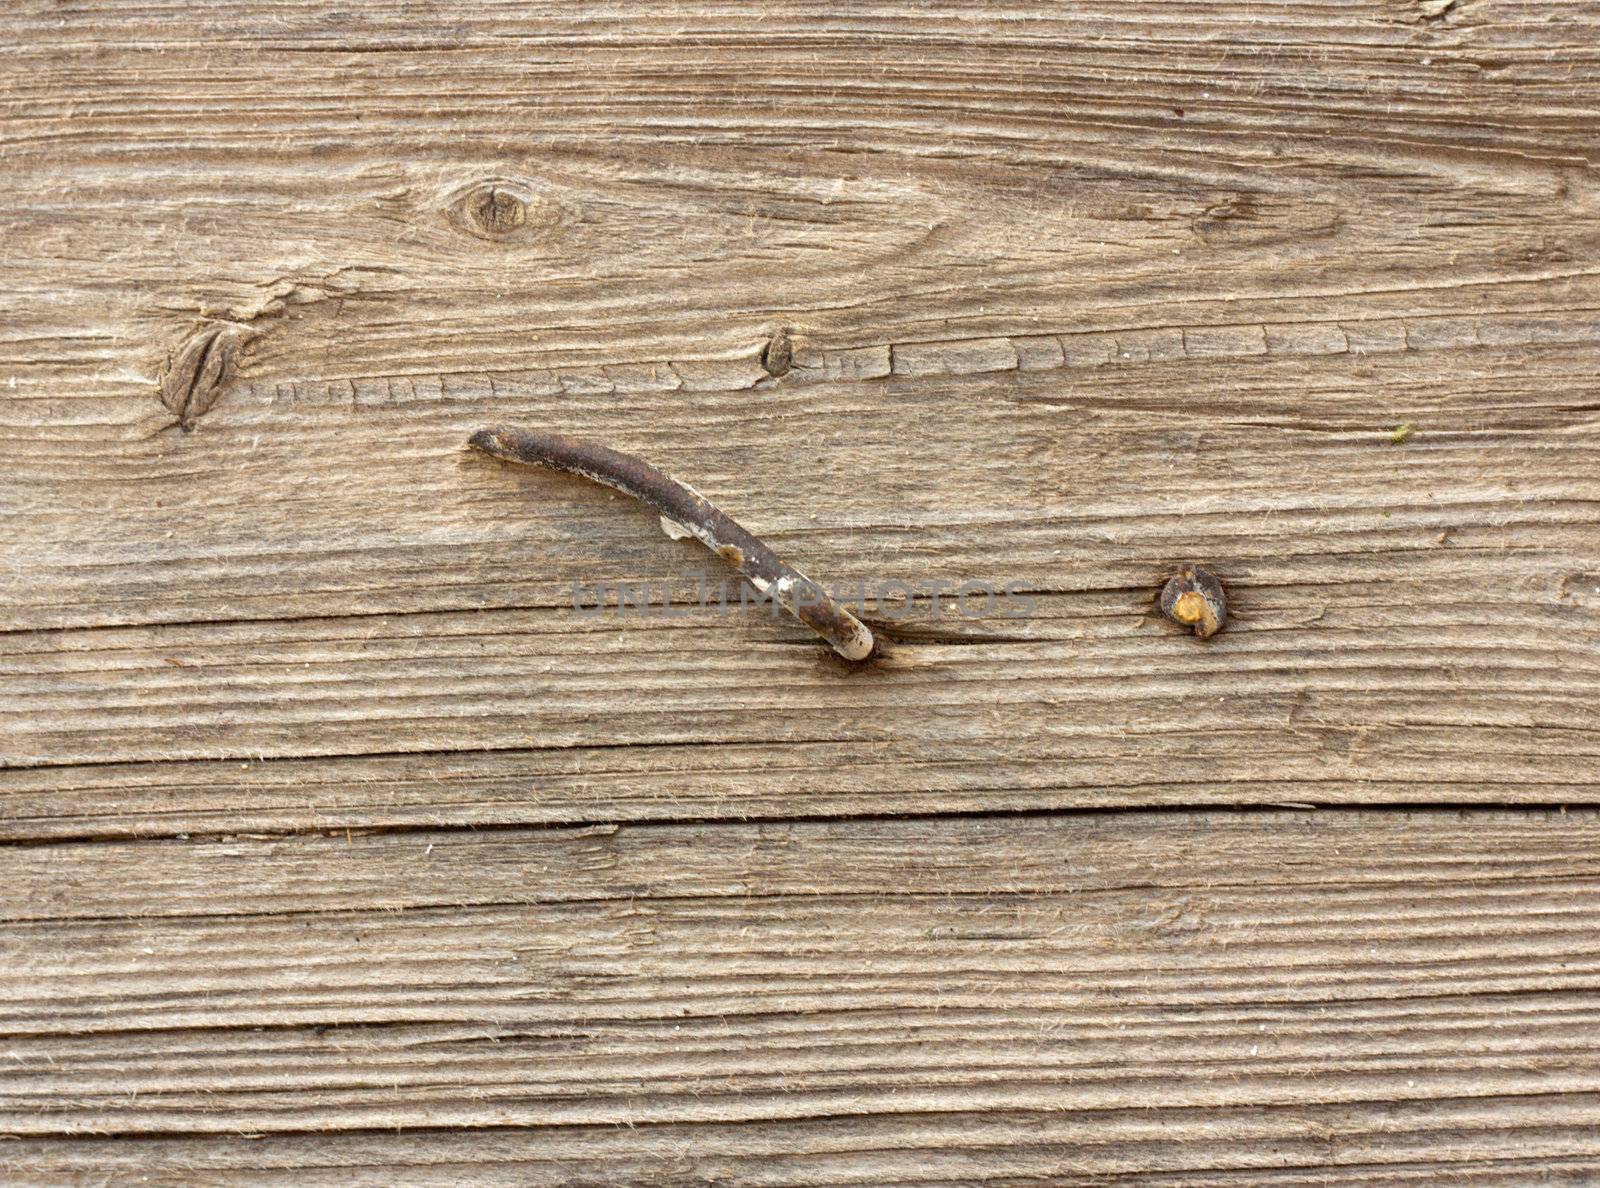 rusty nail in old wood, shallow focus  by schankz